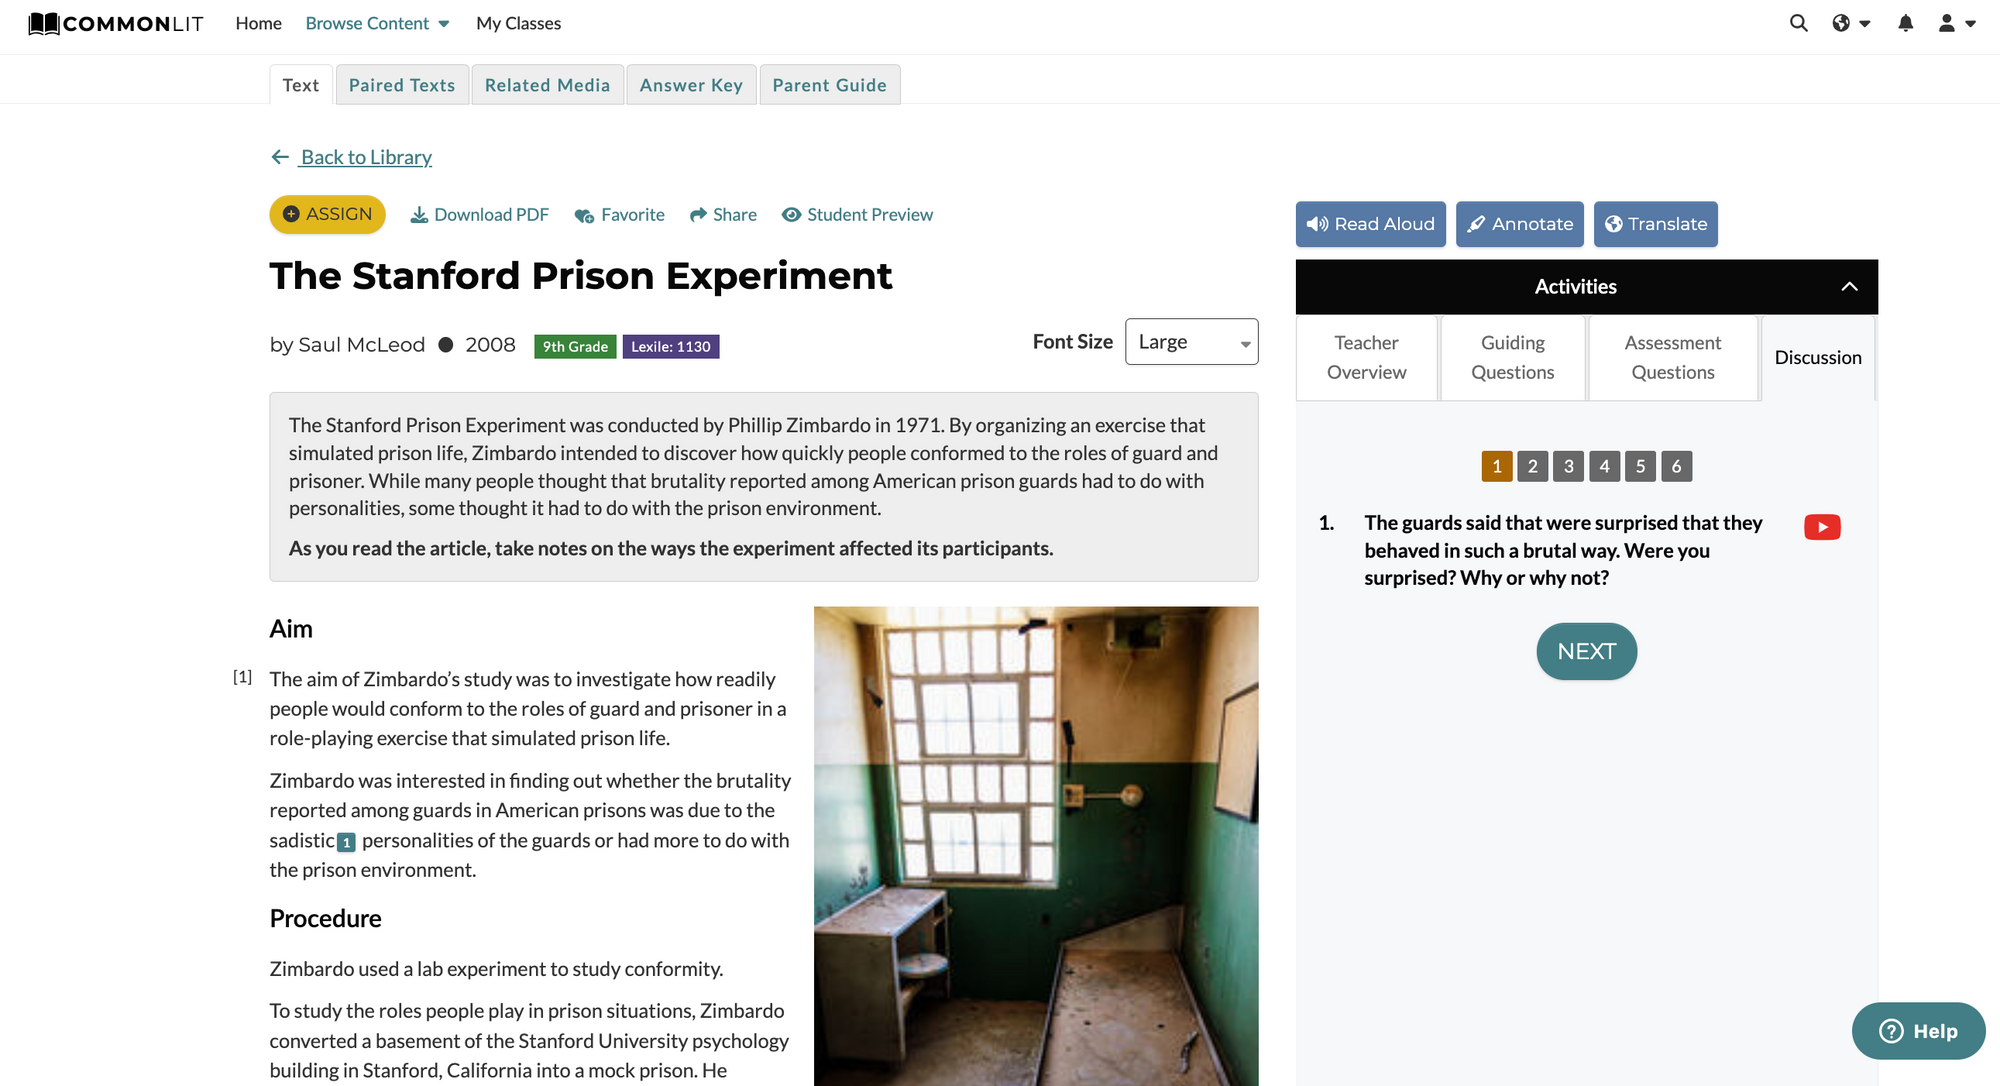 Screenshot of CommonLit's digital reading lesson "The Stanford Prison Experiment"